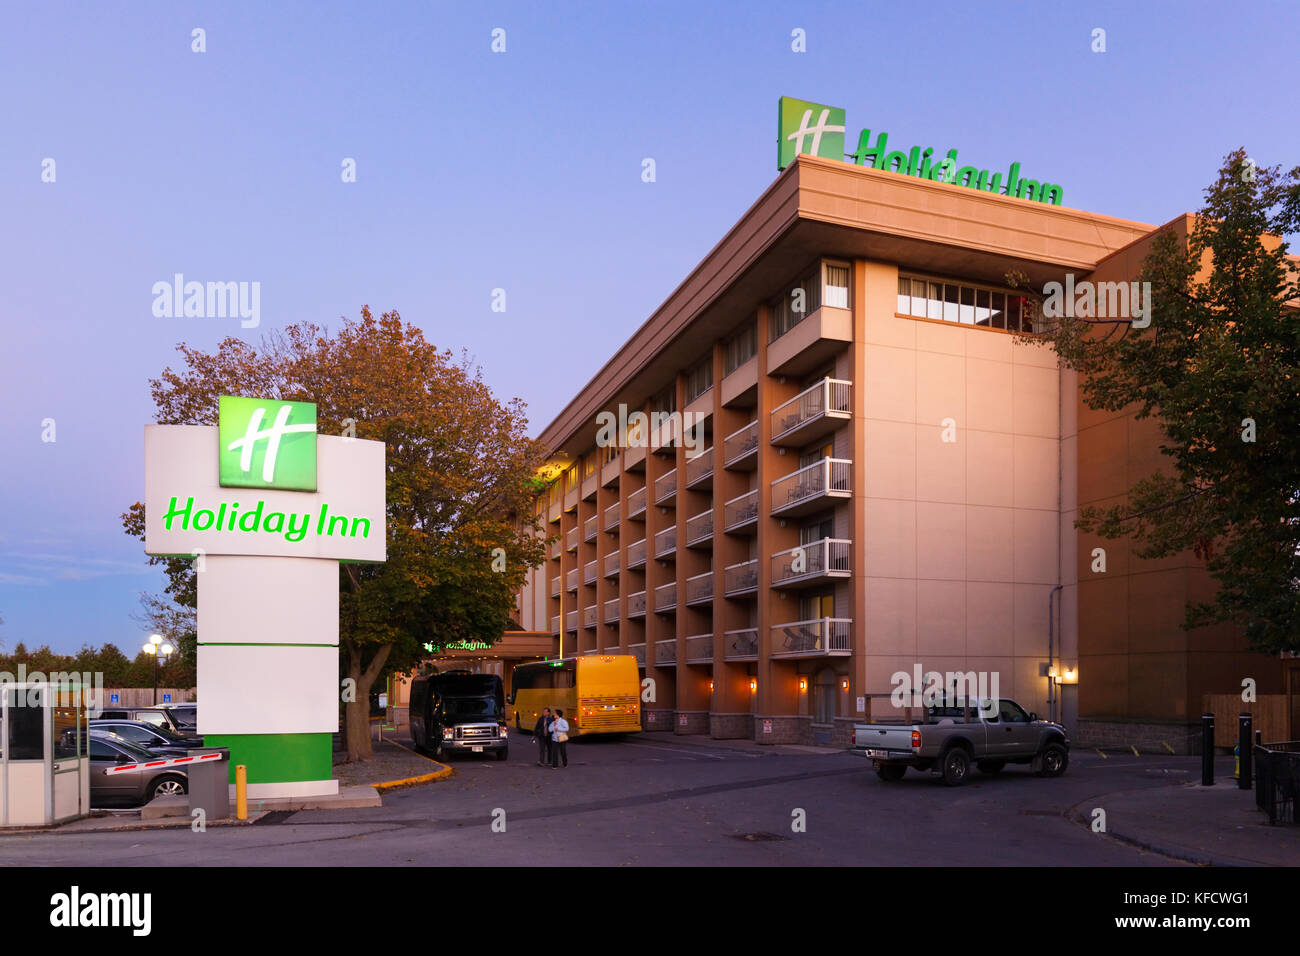 The Holiday Inn hotel at dusk in downtown Kingston, Ontario, Canada. Stock Photo